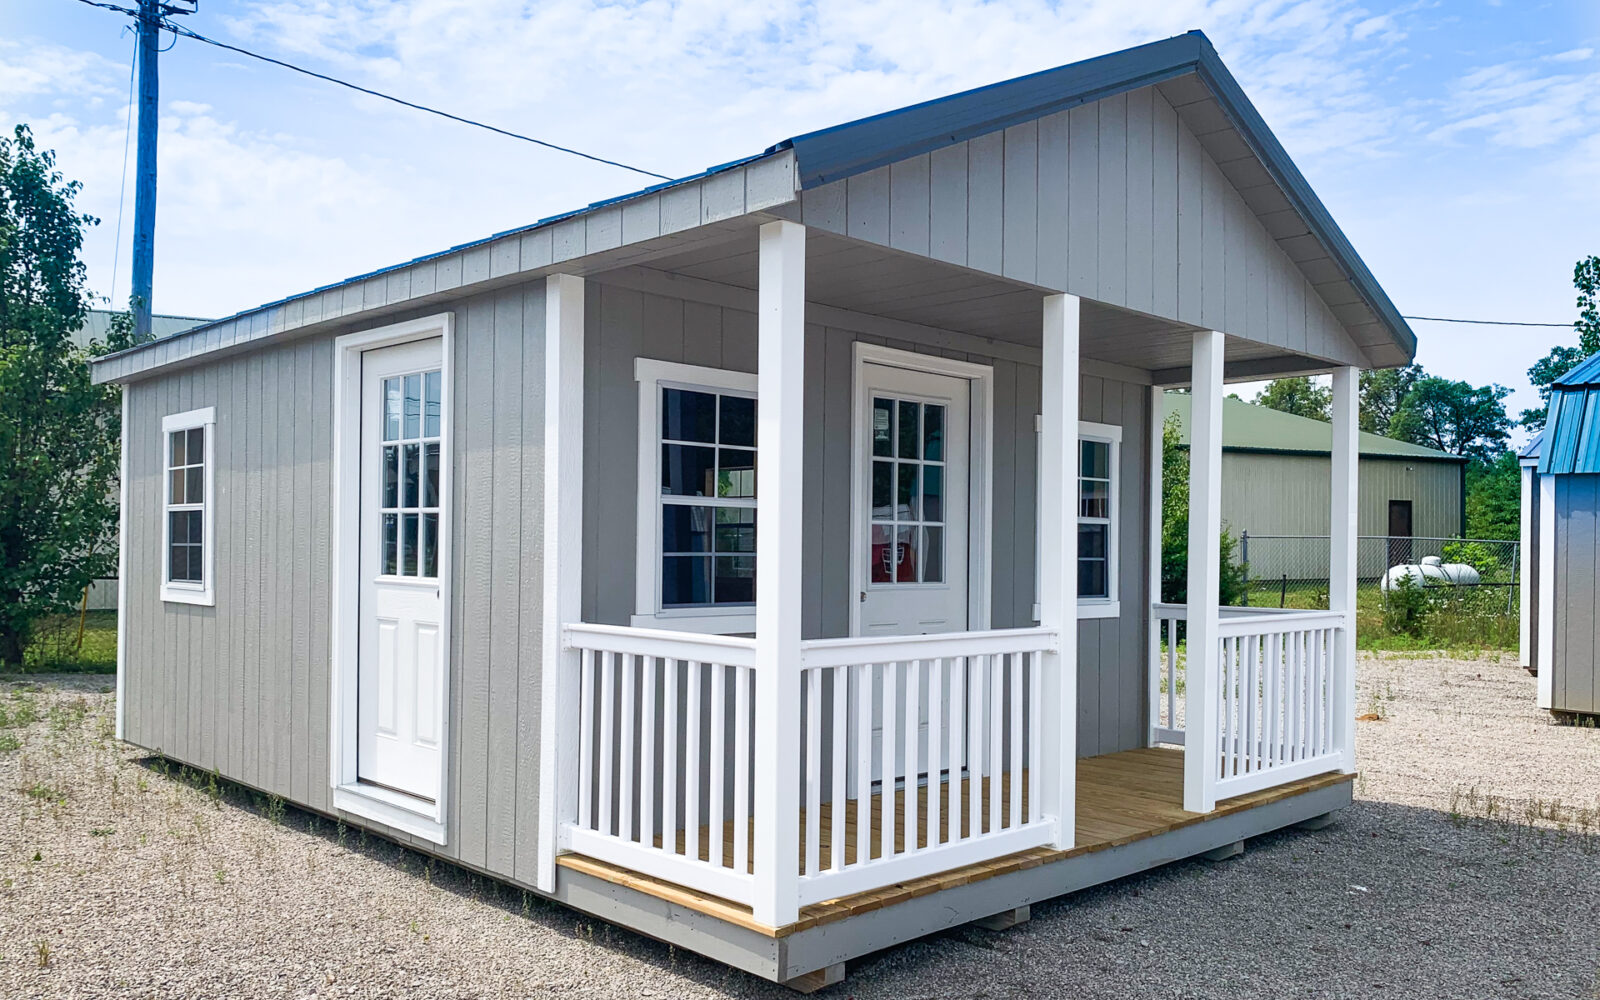 Tiny home following the KY building regulations.